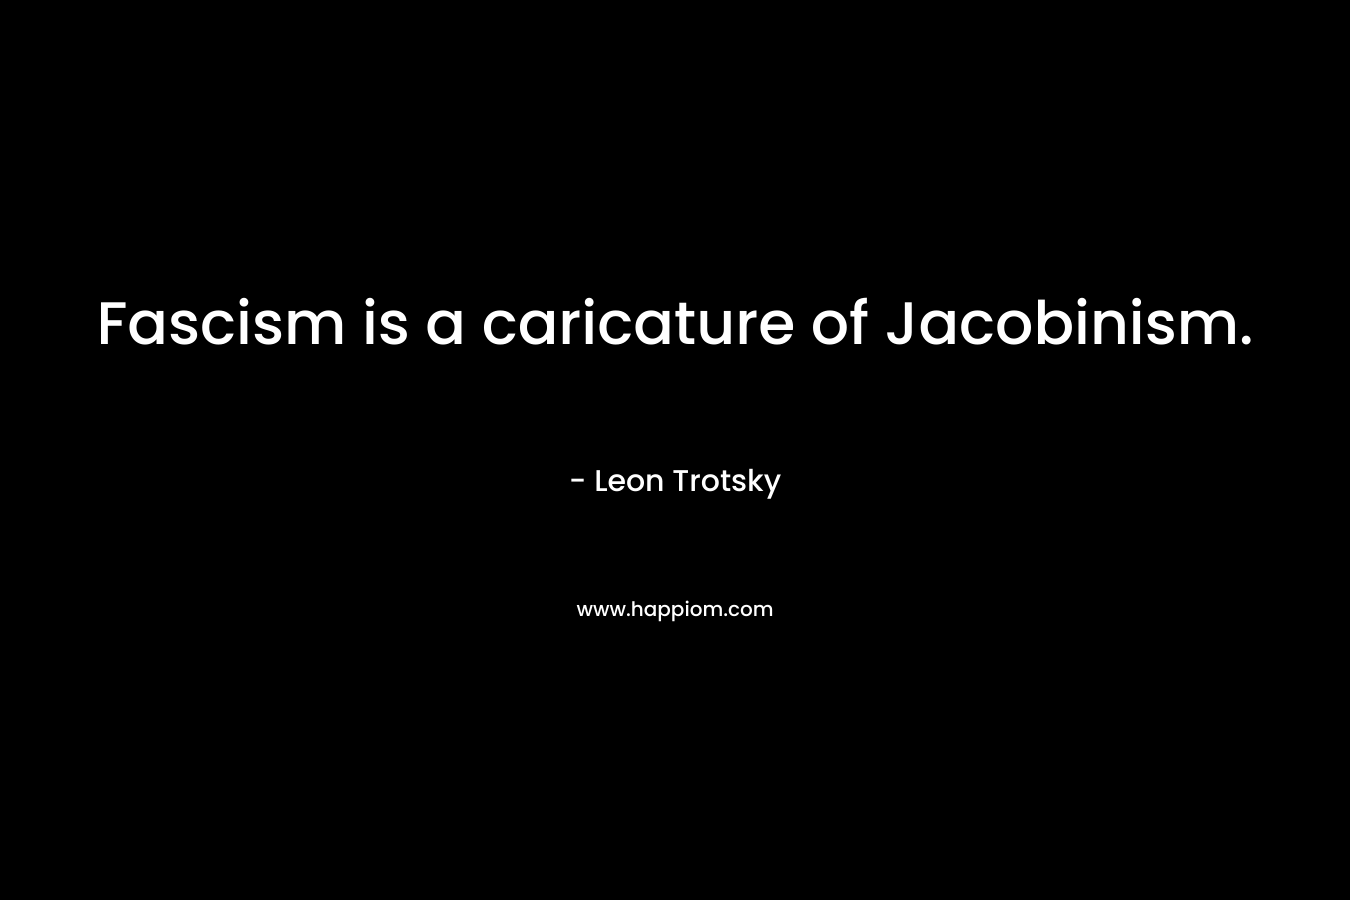 Fascism is a caricature of Jacobinism. – Leon Trotsky